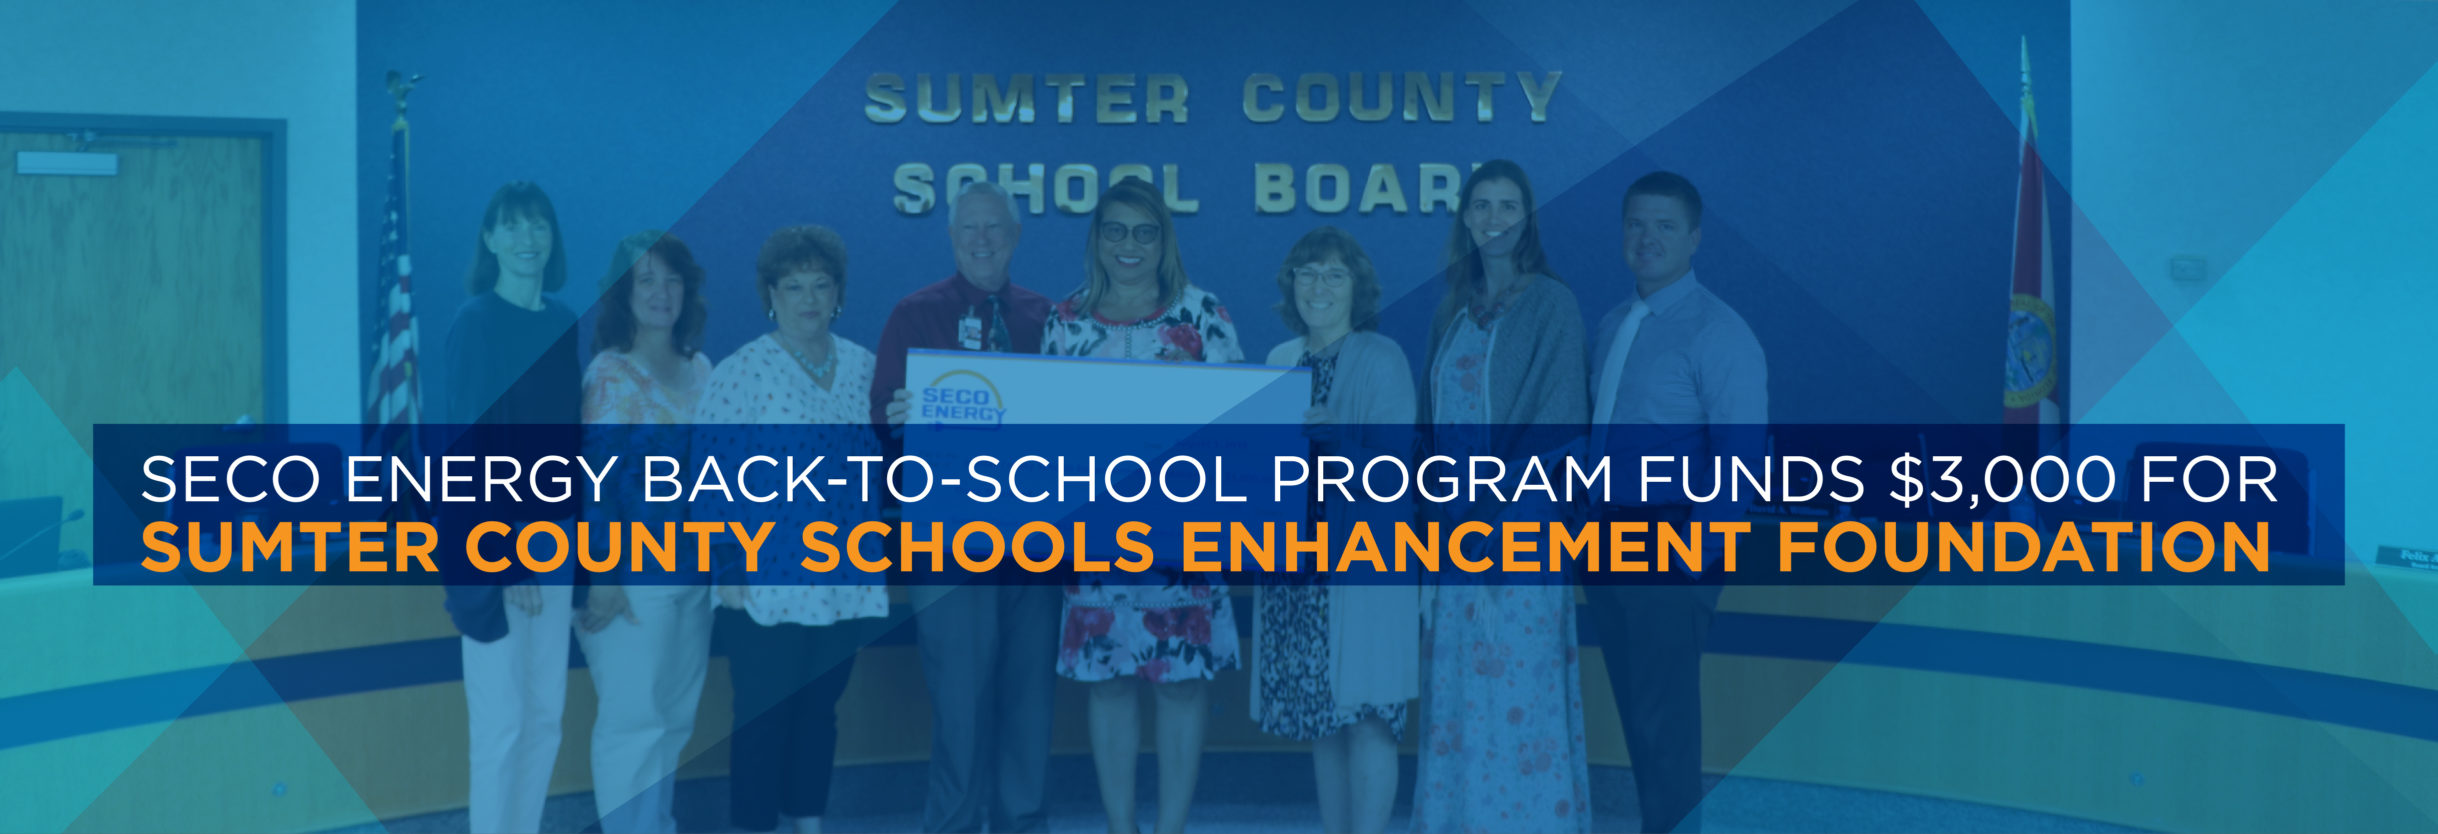 SECO Energy Back-To-School Program Funds $3,000 for Sumter County Schools Enhancement Foundation